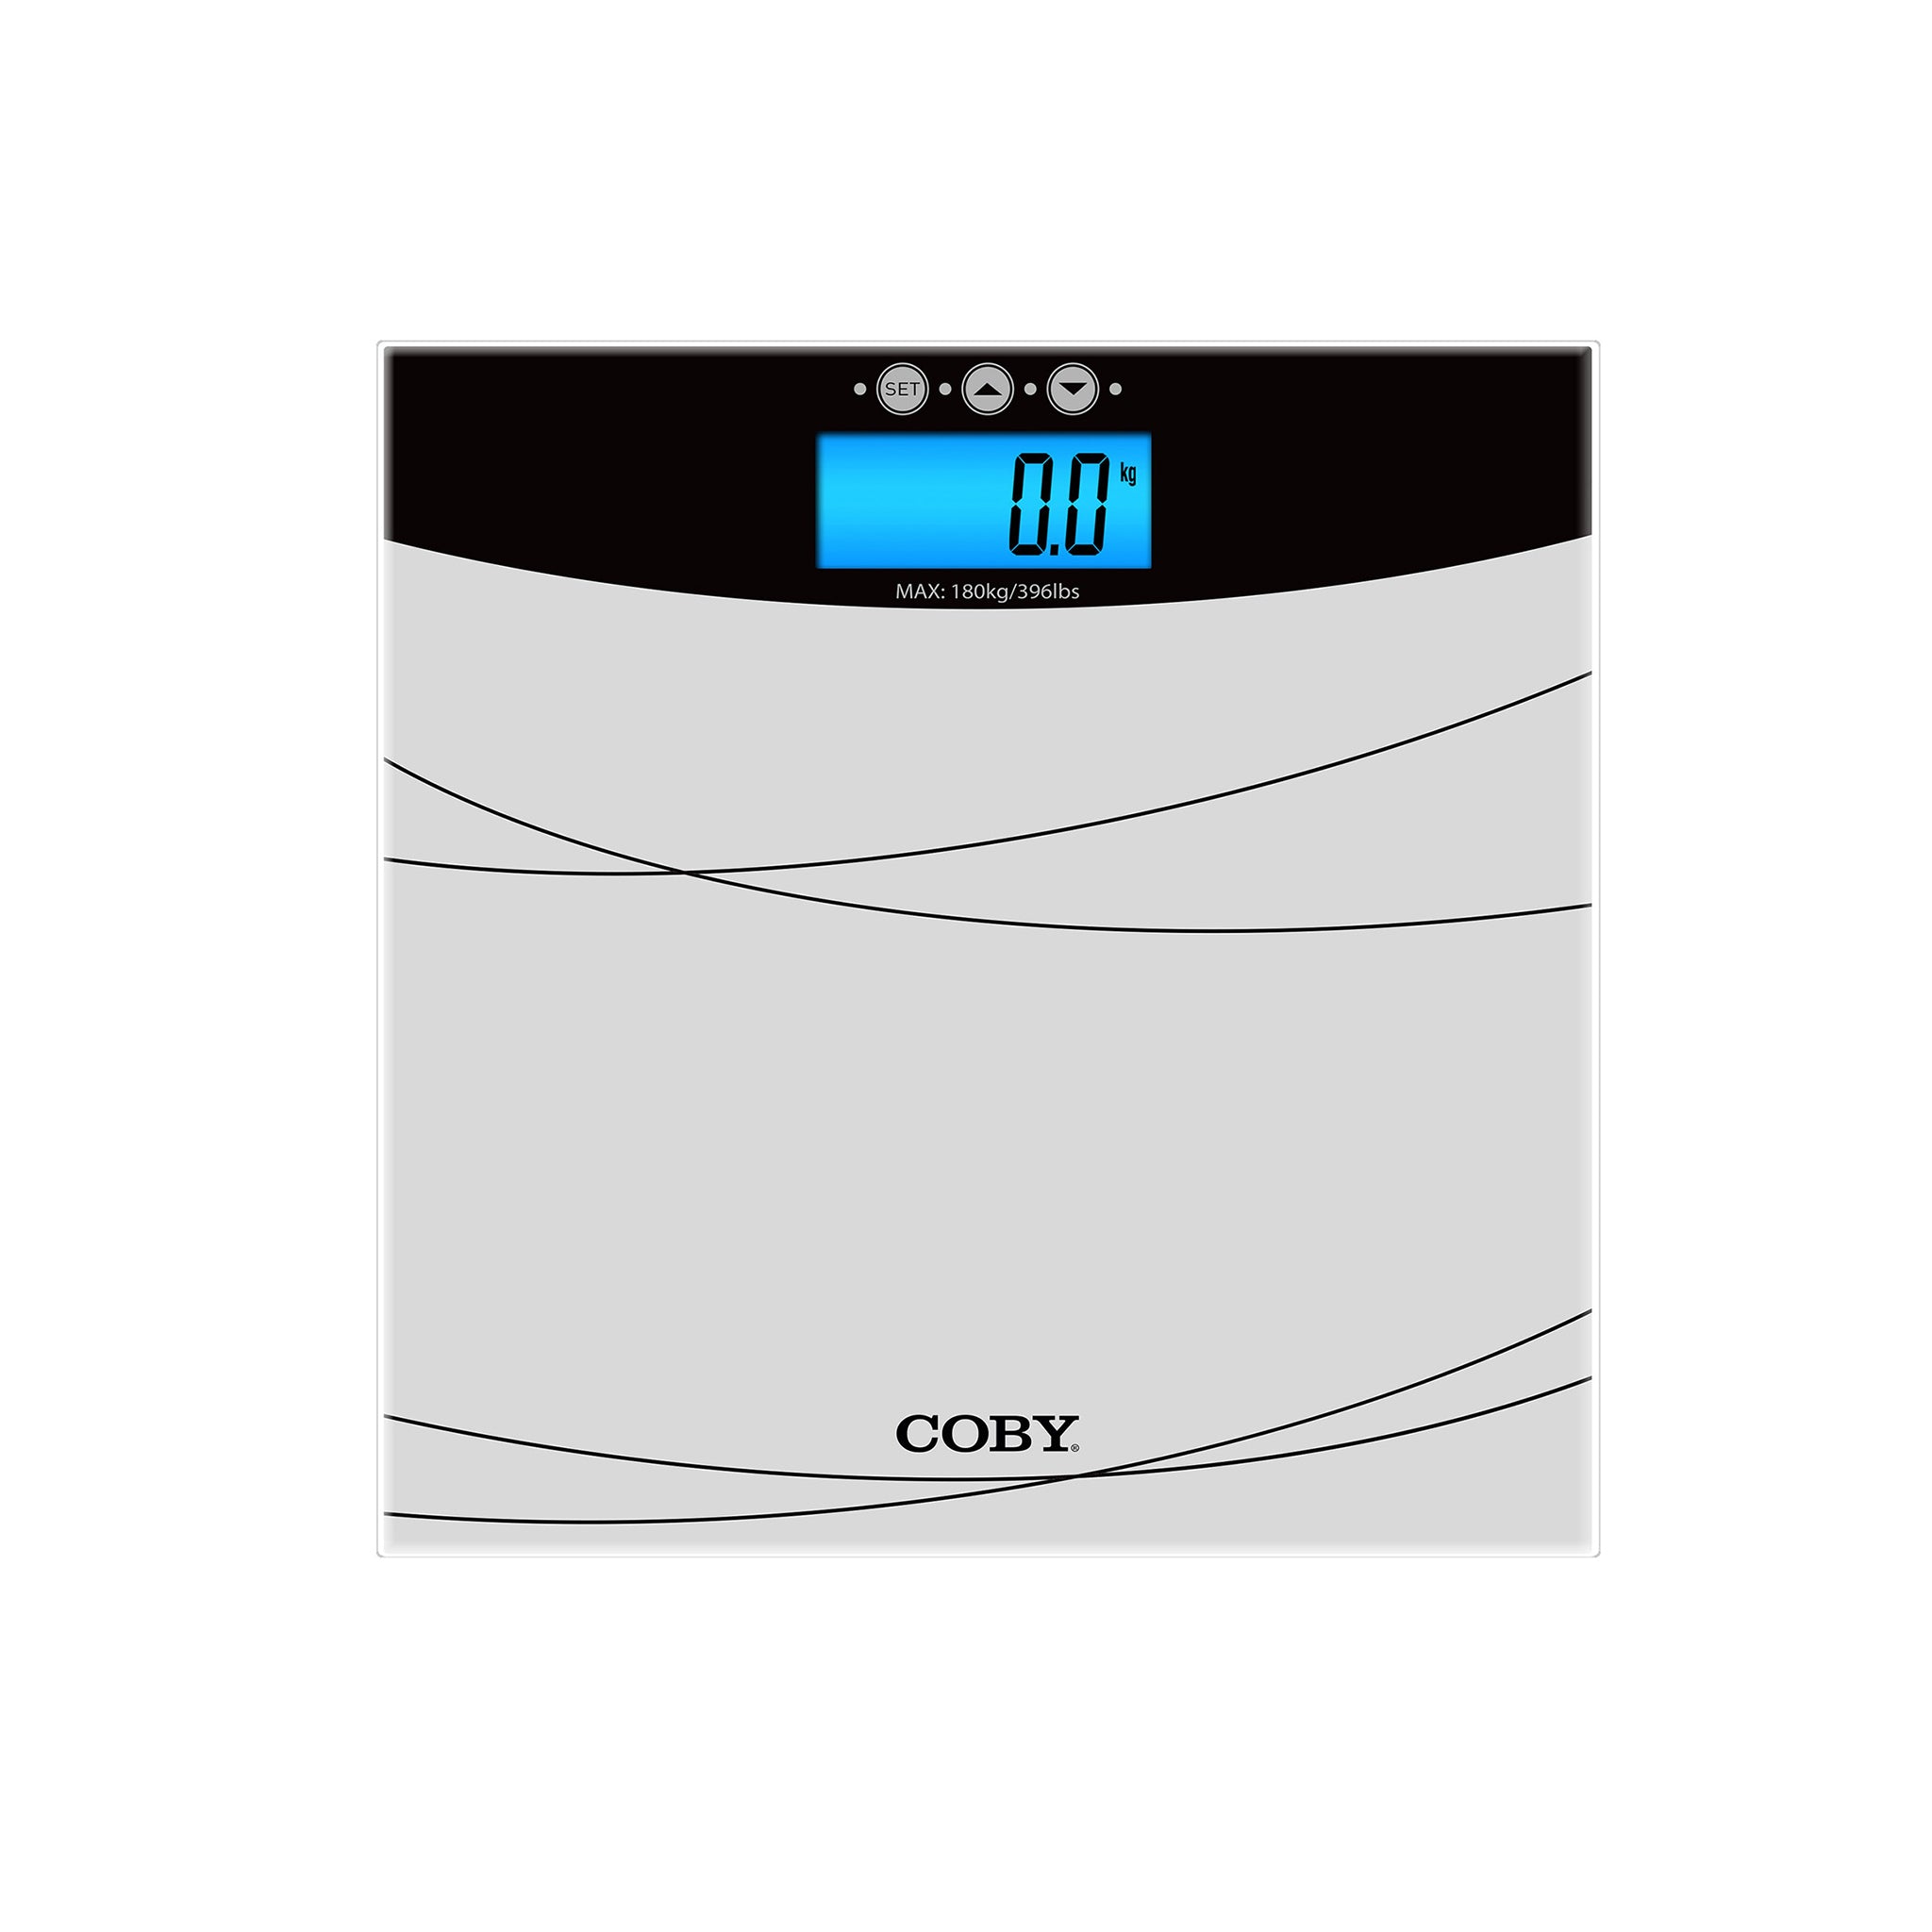 Black Digital Glass BMI Bathroom Scale With 4 Color Changing LCD Display